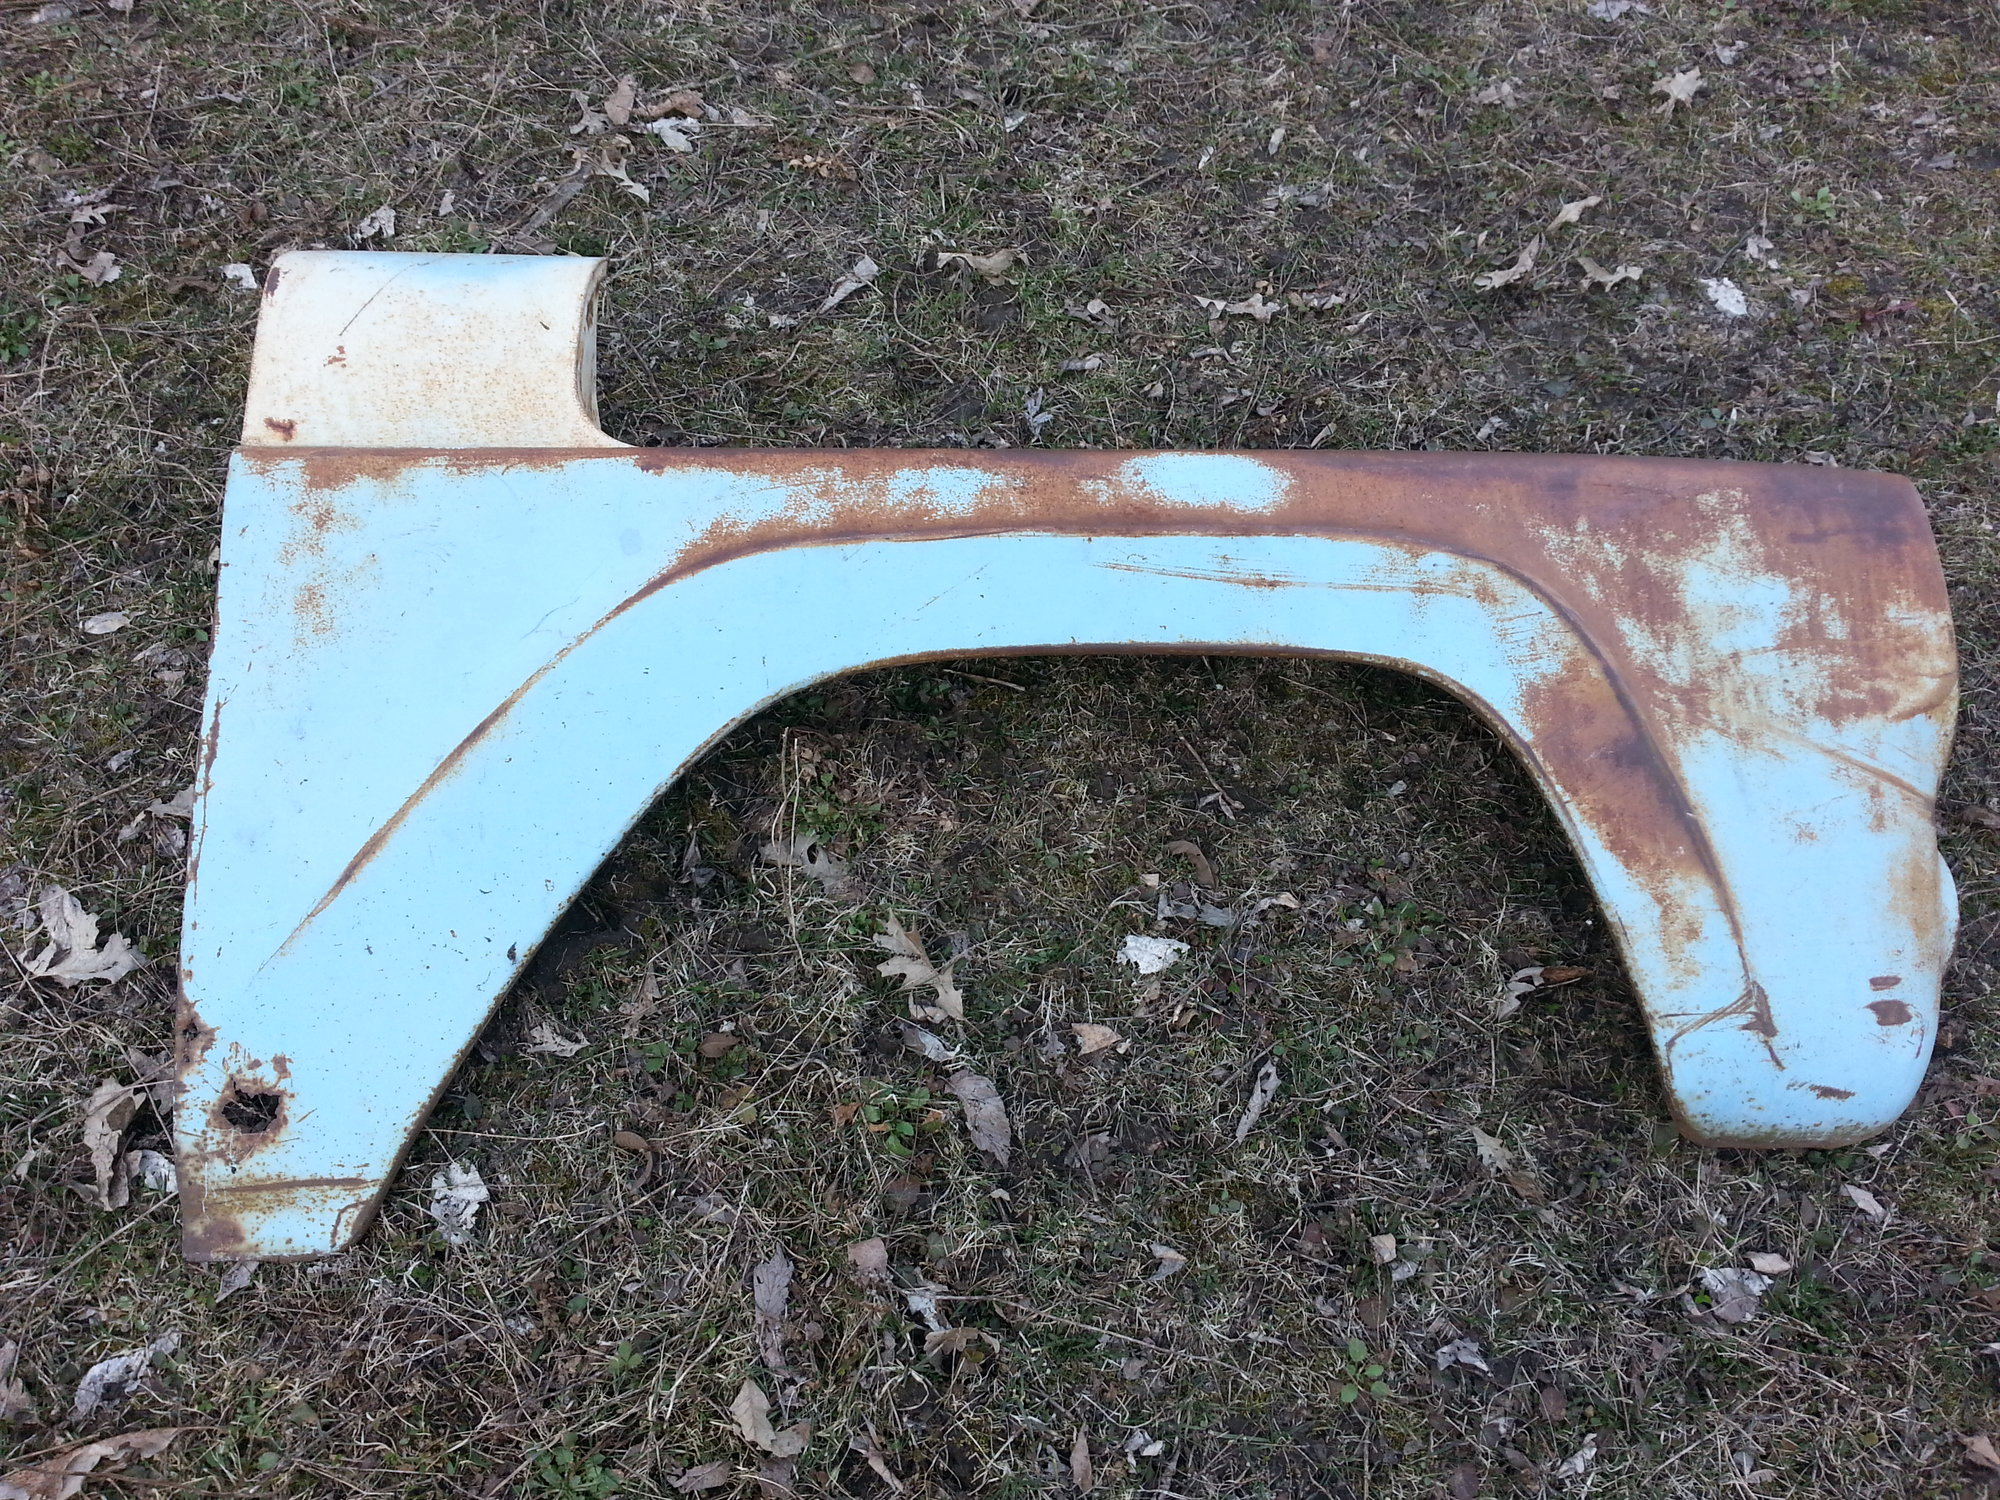 Exterior Body Parts - 1958 F-100 Parts FREE for a Good Home - Used - 1957 to 1960 Ford F-100 - New Richmond, WI 54017, United States